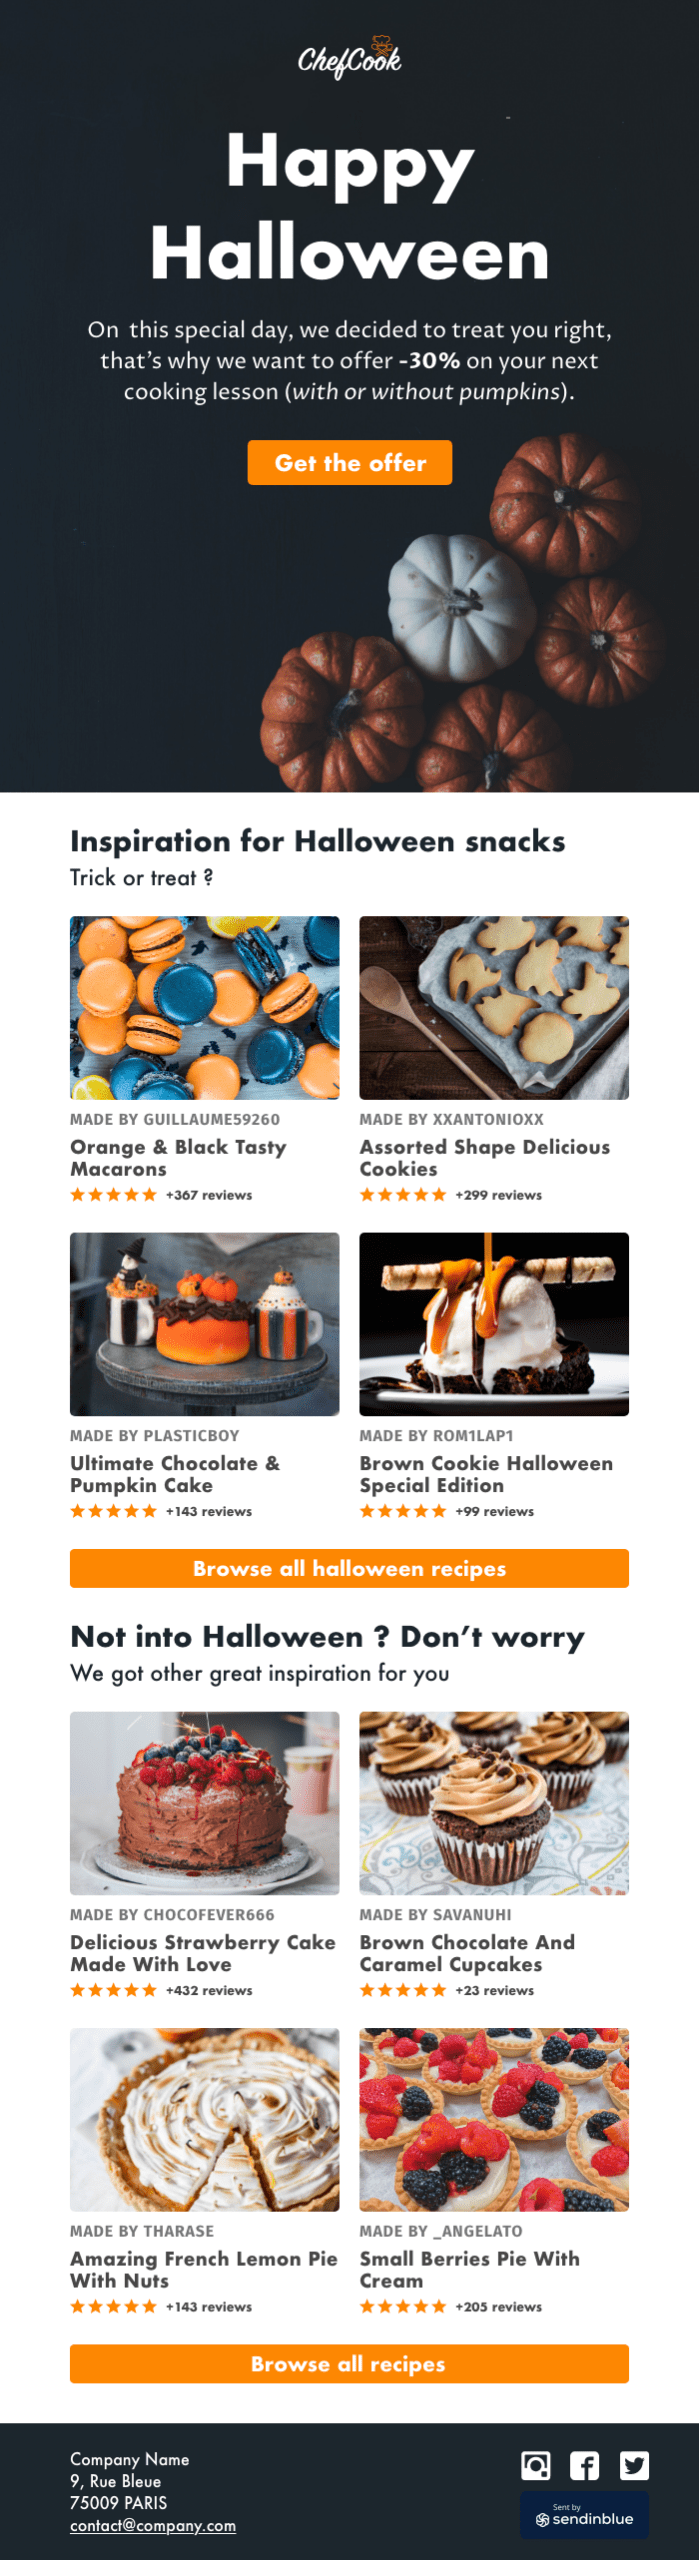 halloween email newsletter example from ChefCook